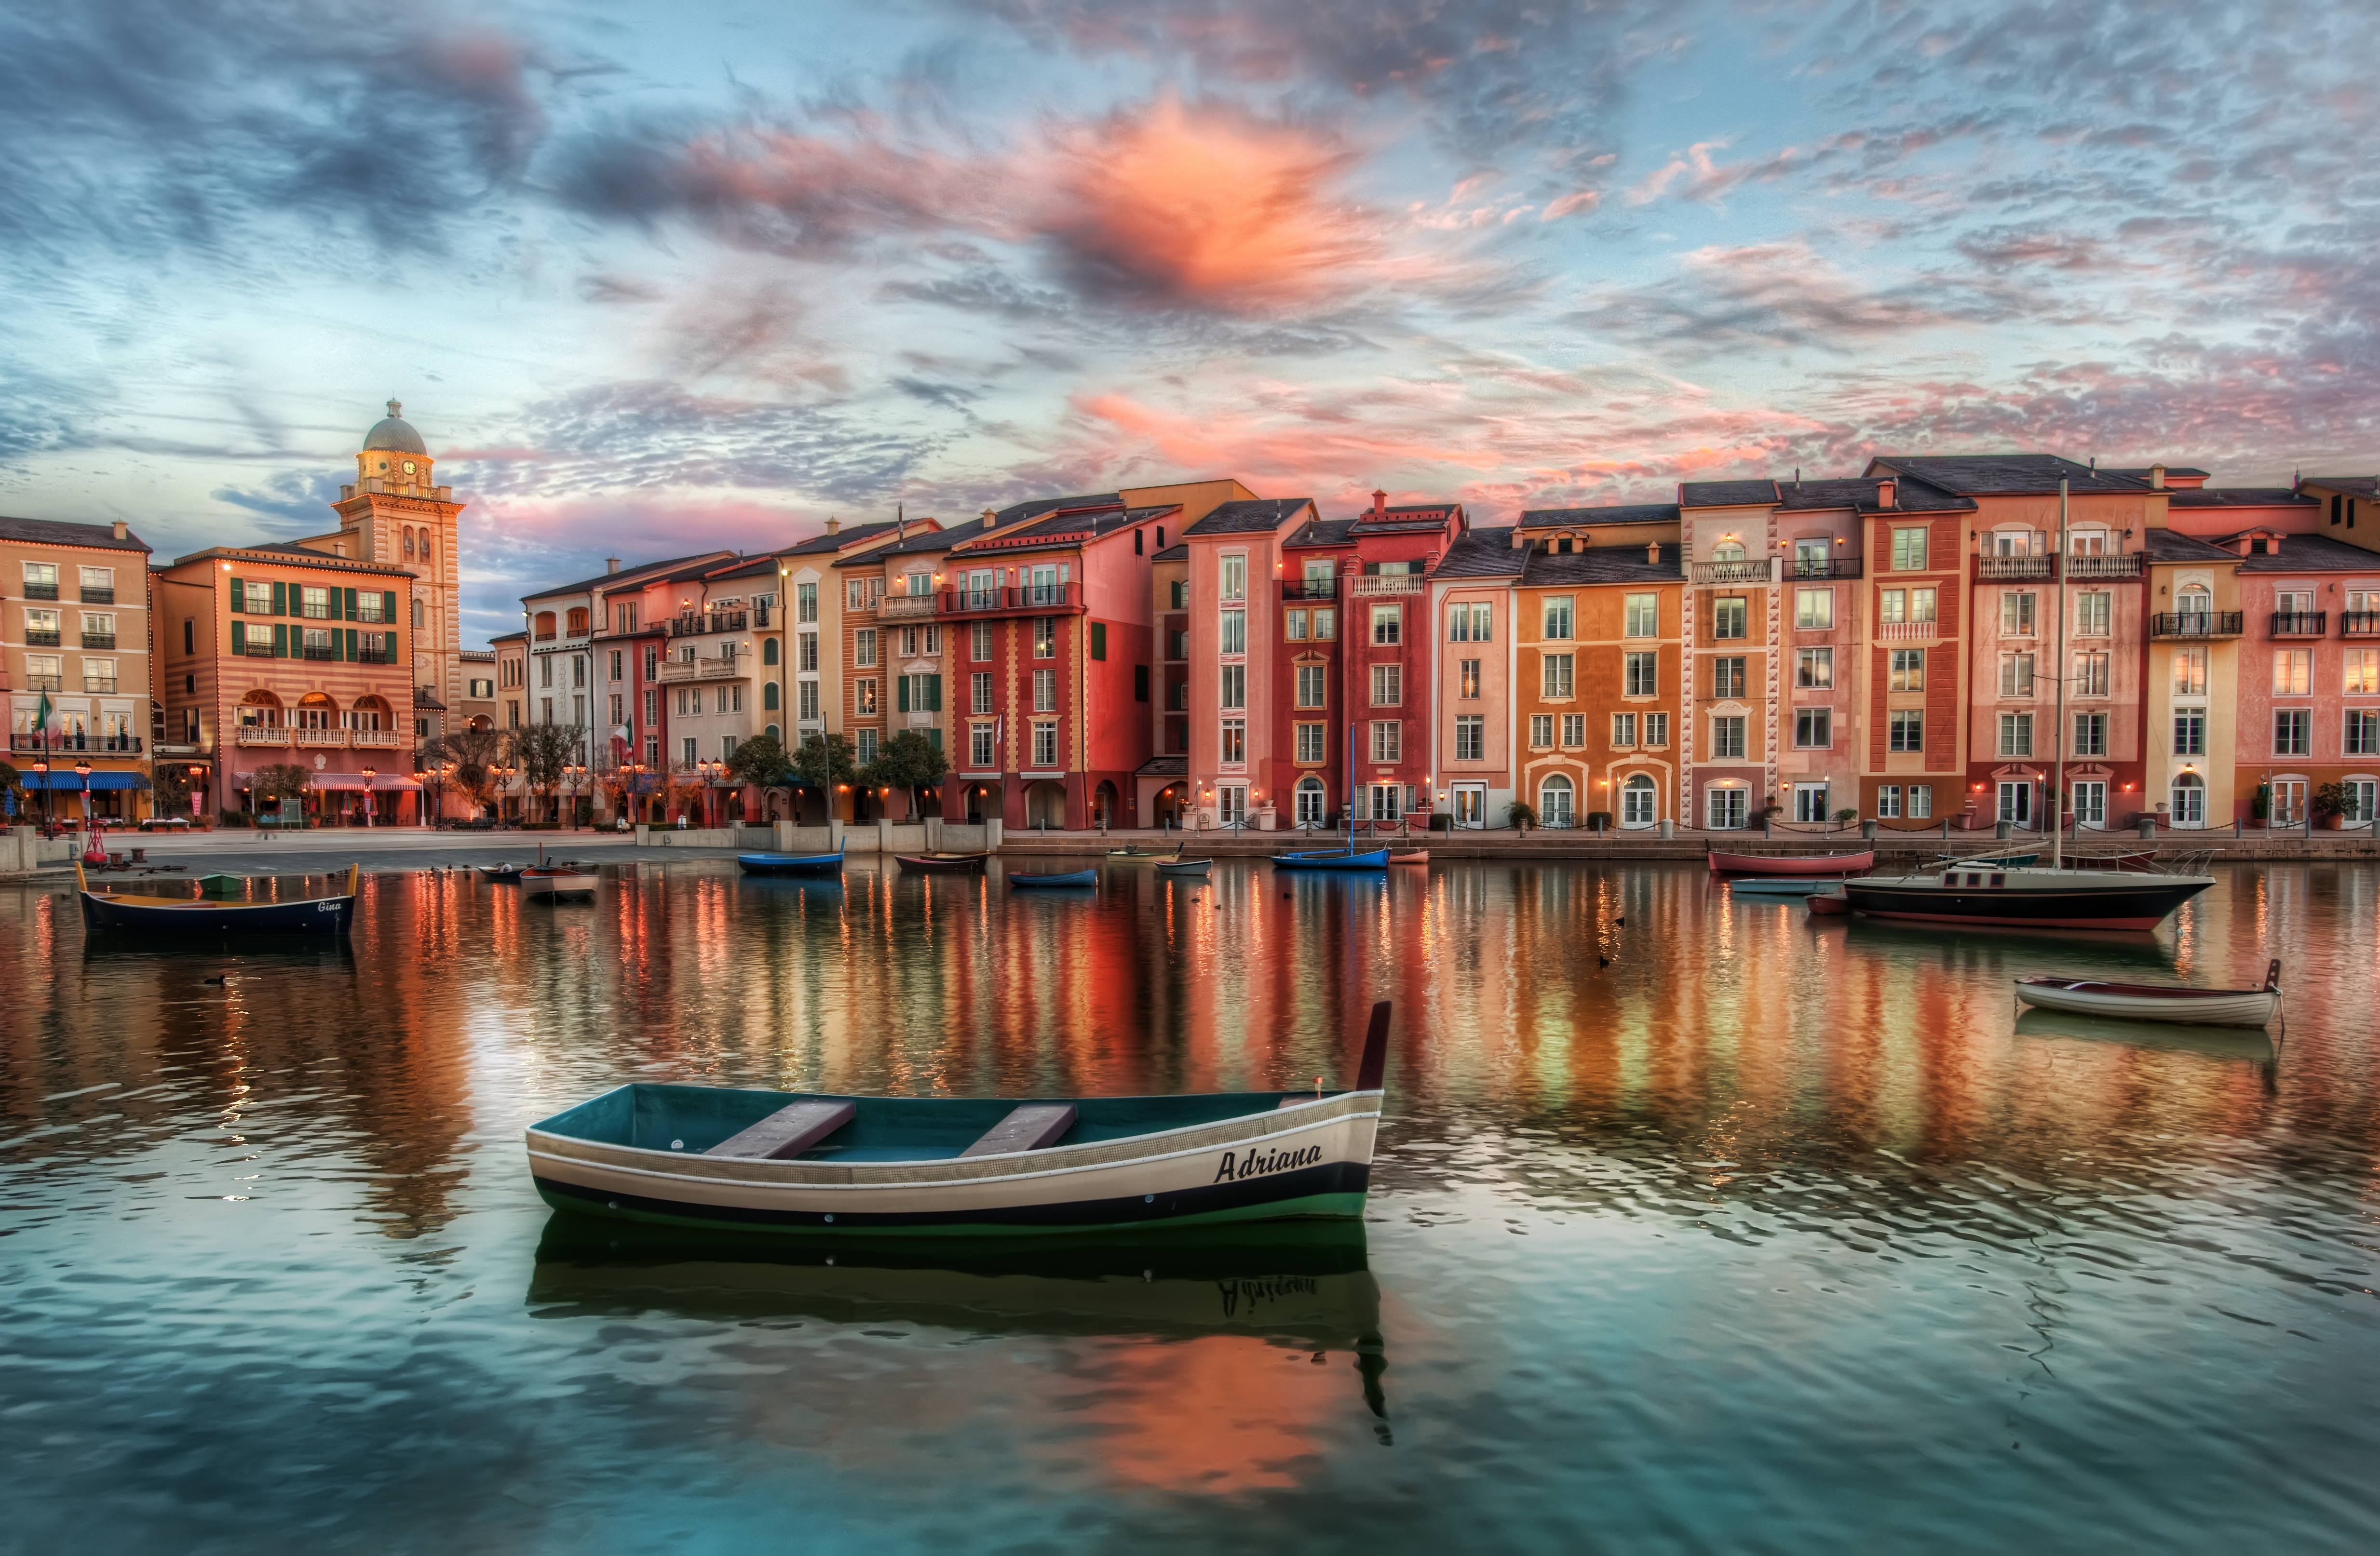 hdr, florida, man made, town, boat, building, house, orlando, towns